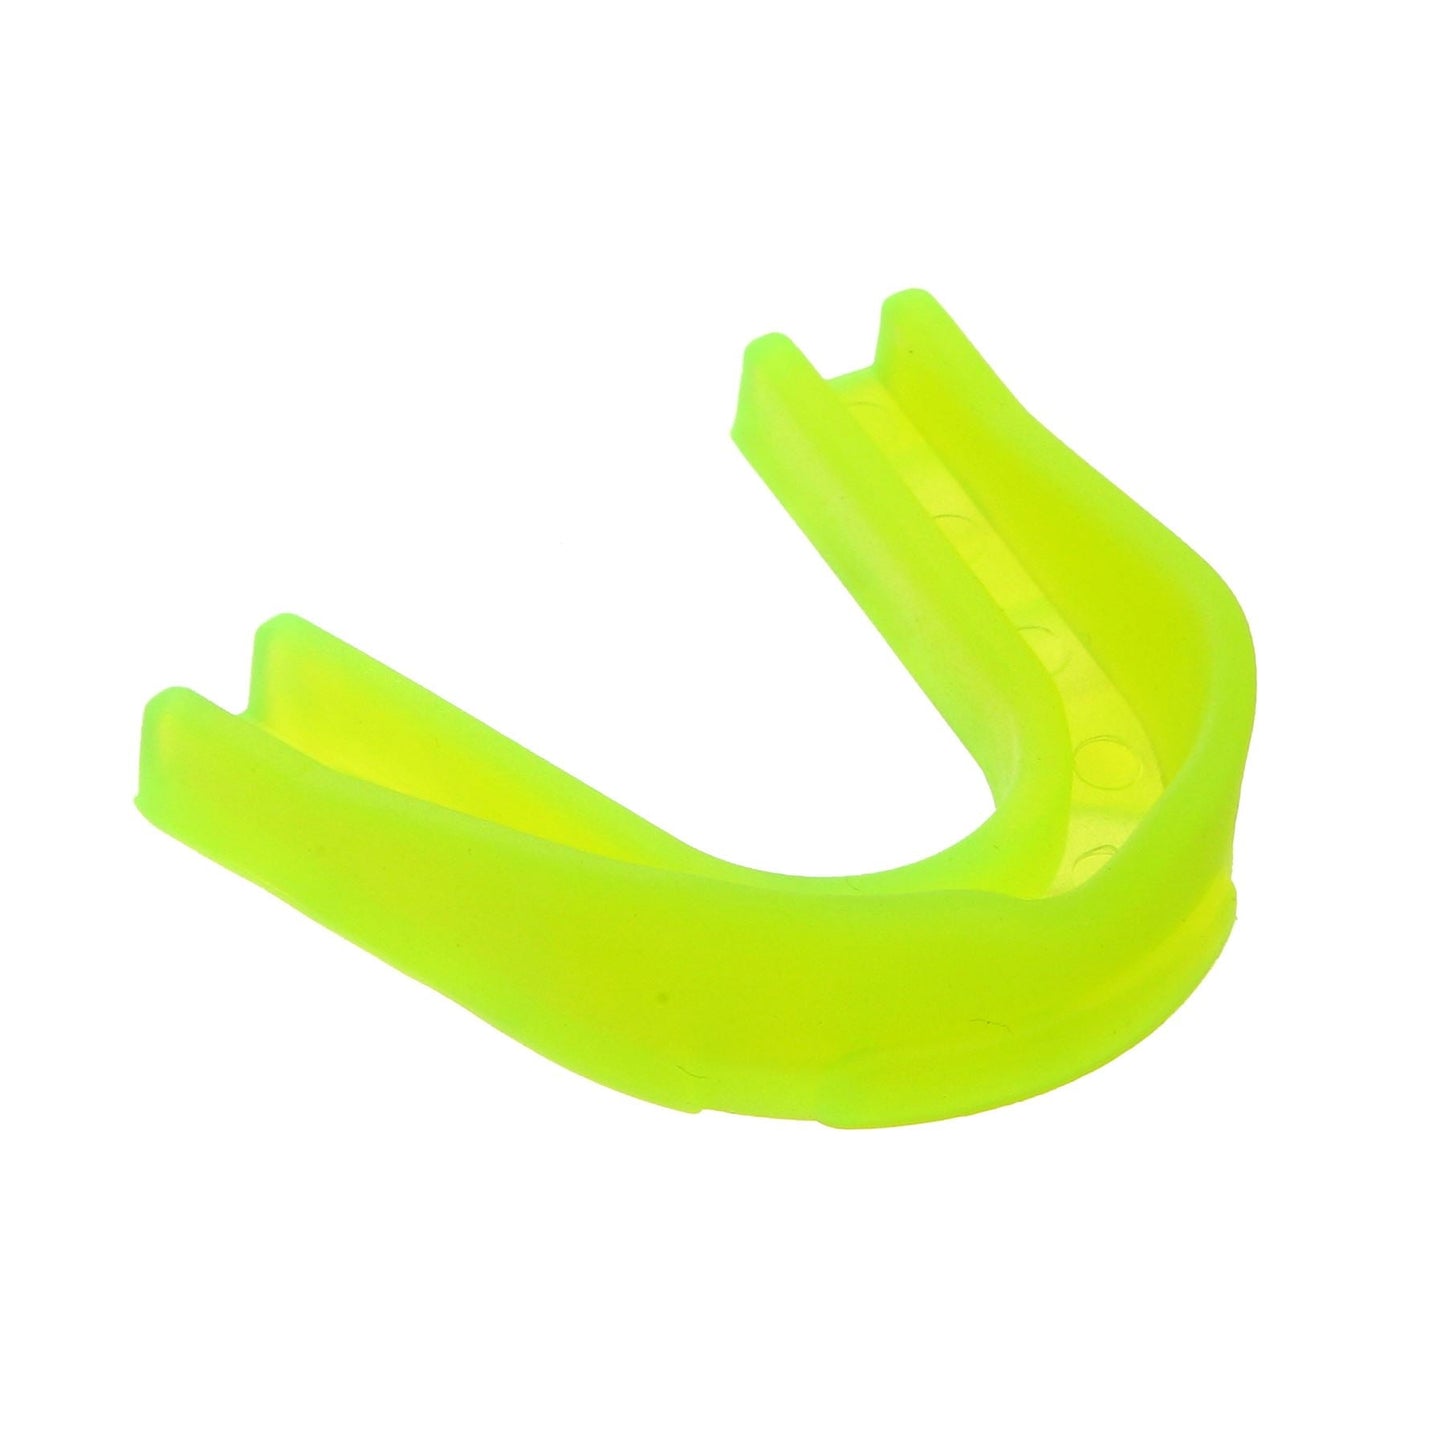 Buy Mouth Guard-Mouth Guard-Splay (UK) Limited-Medium-Yellow-Splay UK Online